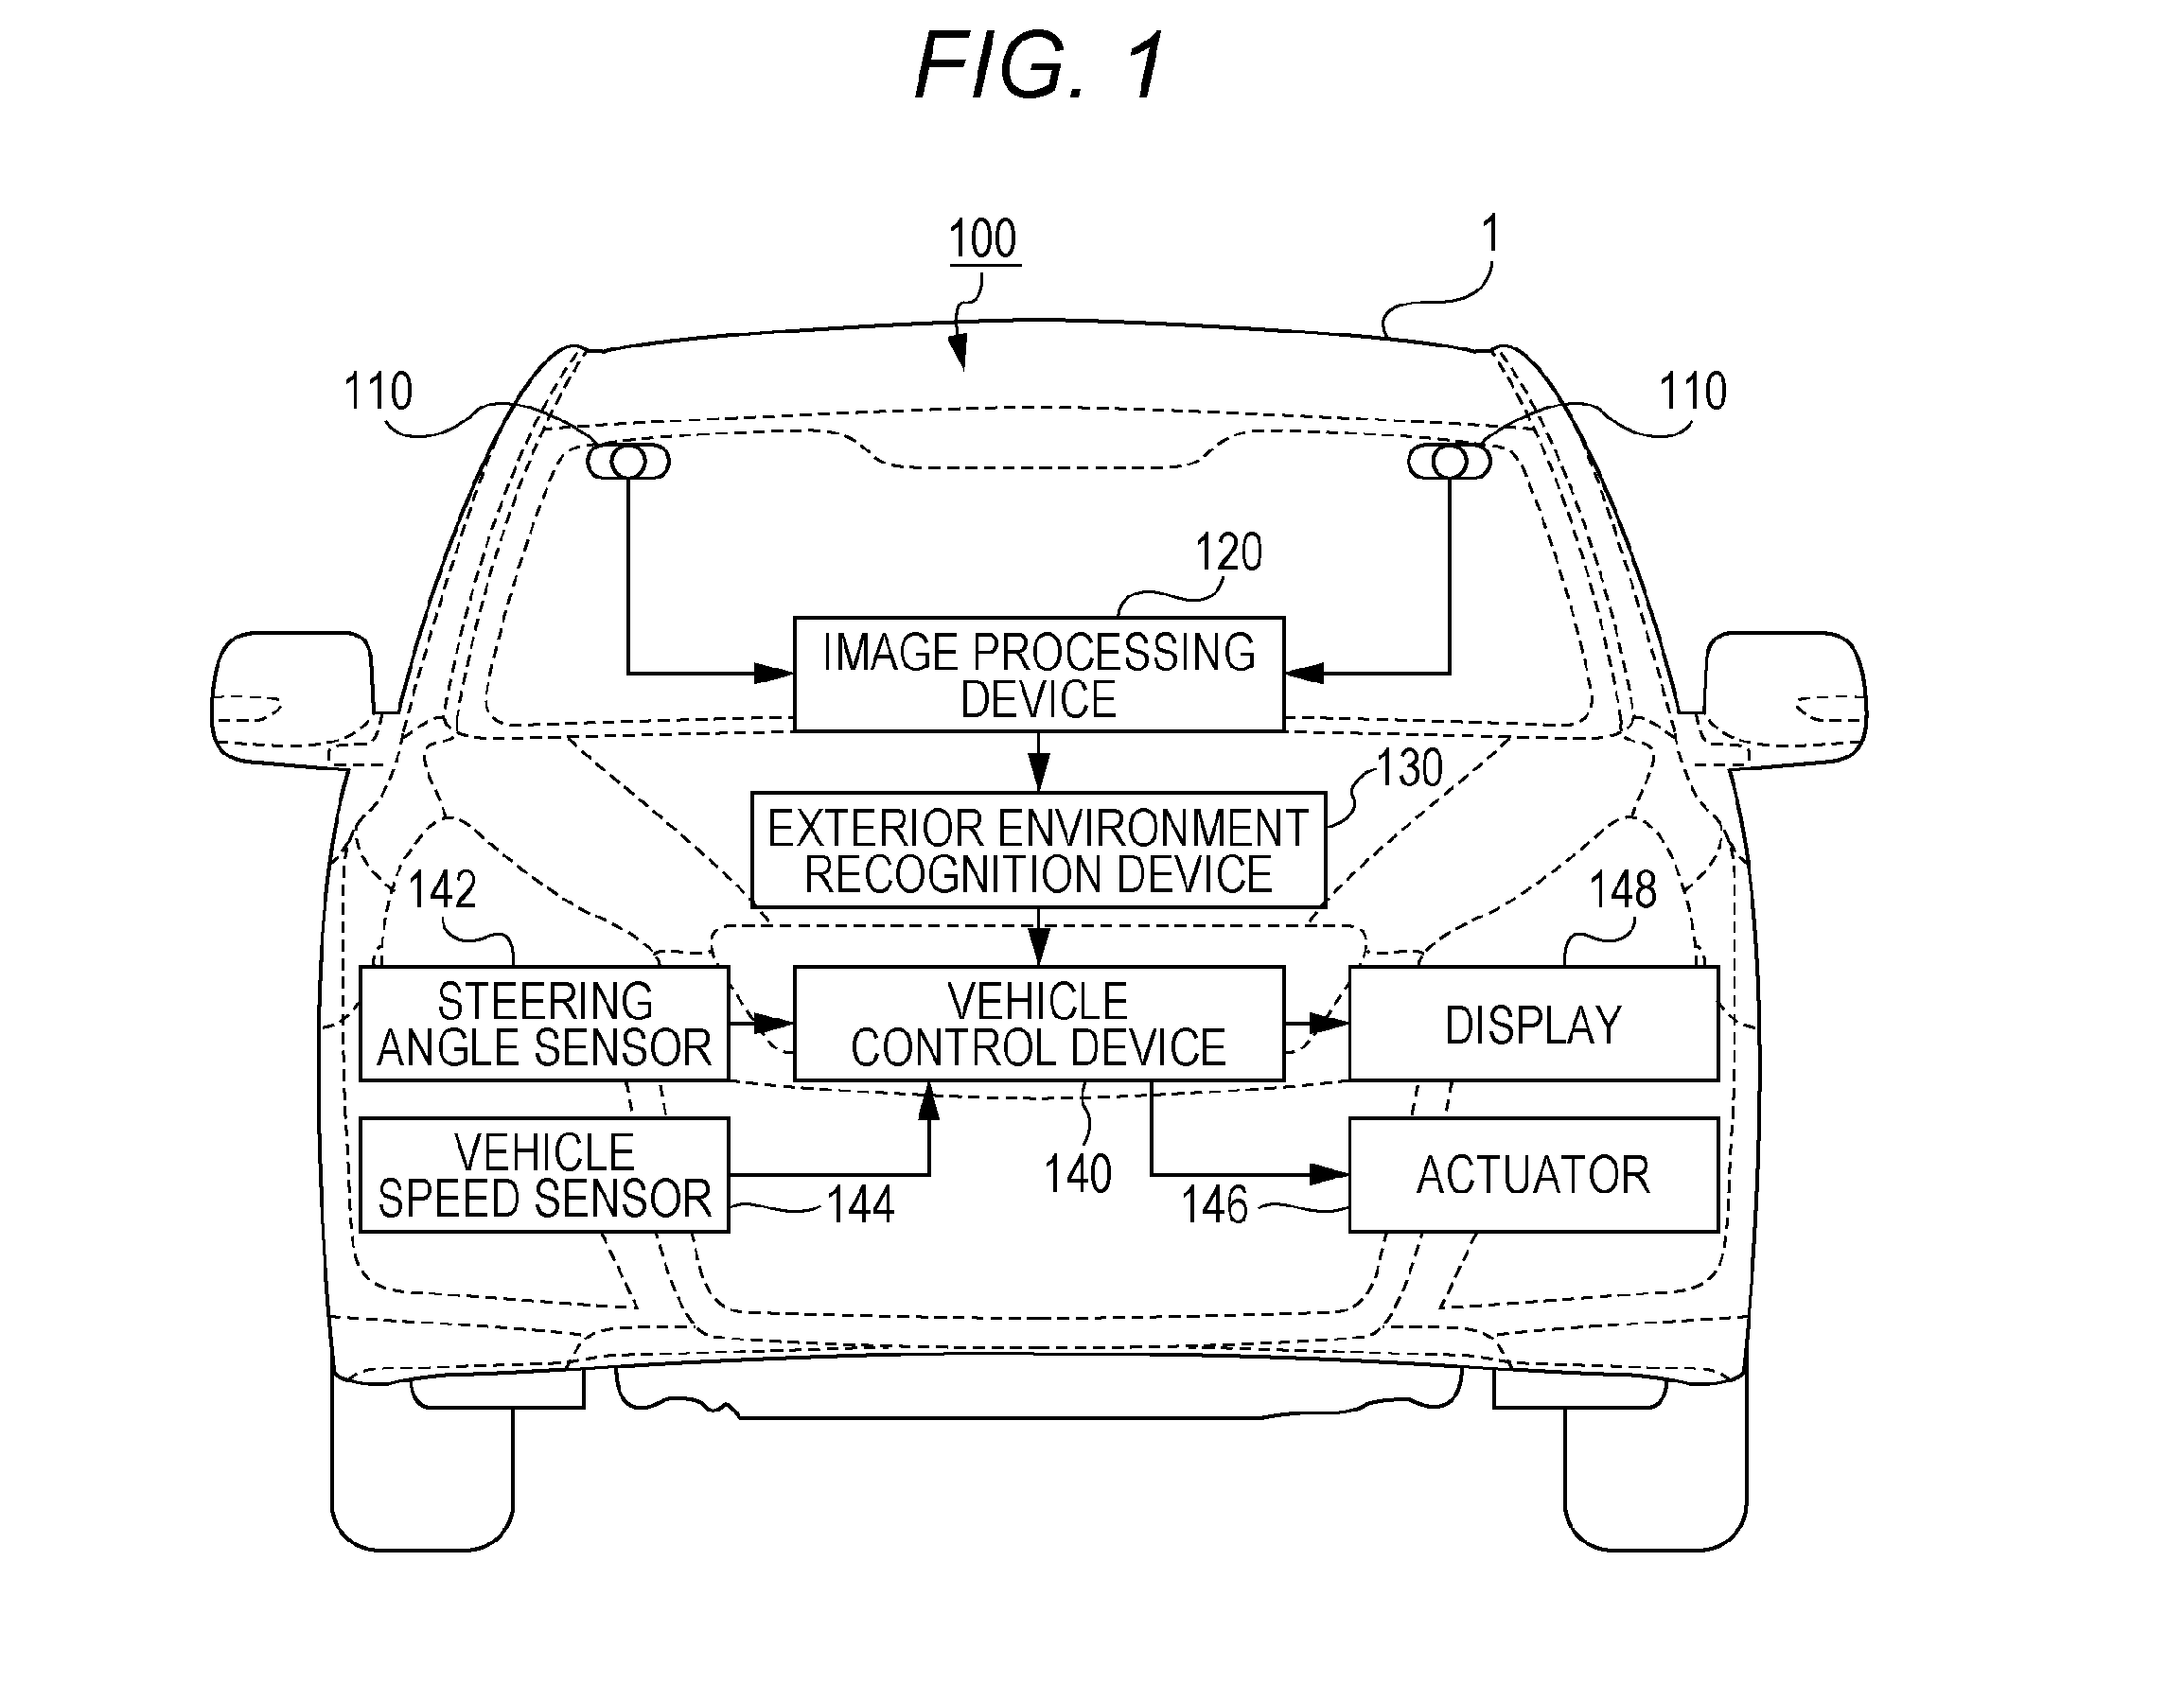 Exterior environment recognition device